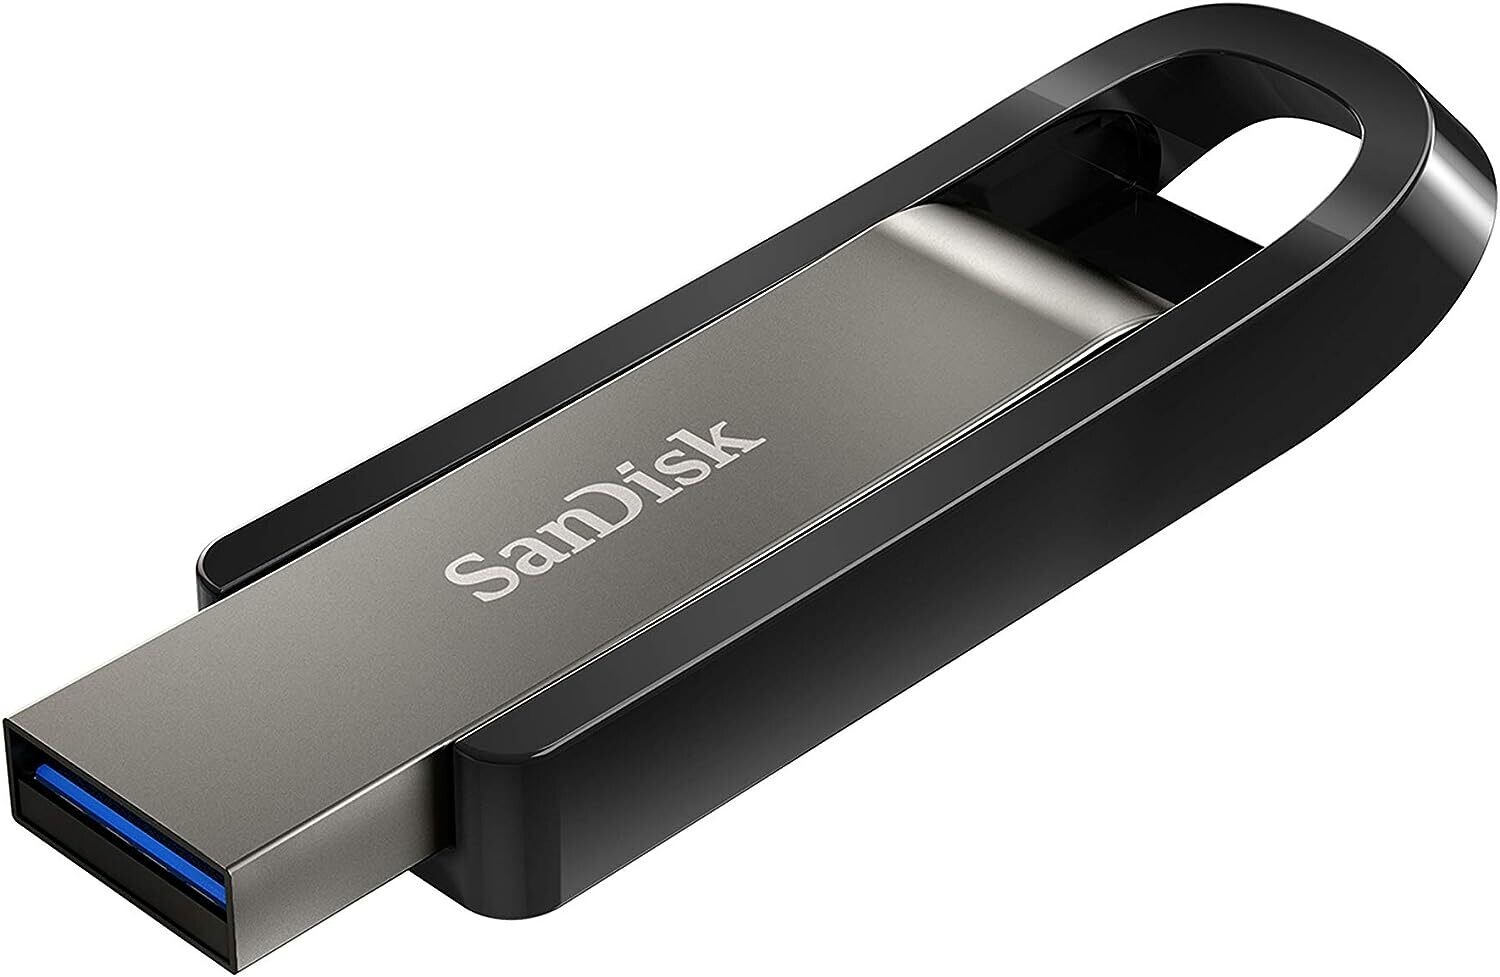 SanDisk 64GB Extreme Go USB 3.2 Type-A Flash Drive SDCZ810-064G-G46